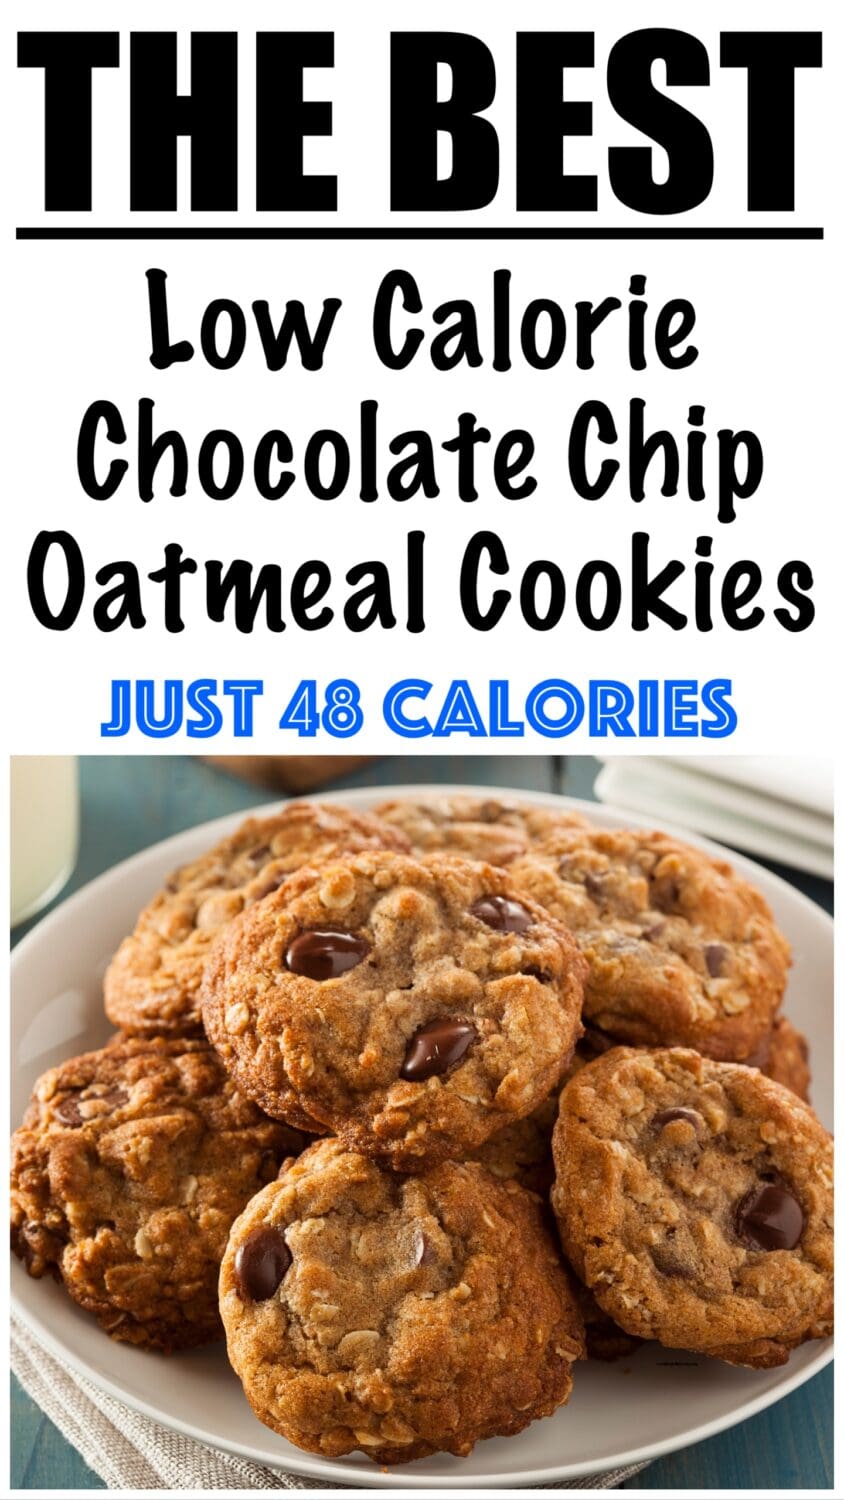 Low Calorie Chocolate Chip Oatmeal Cookies